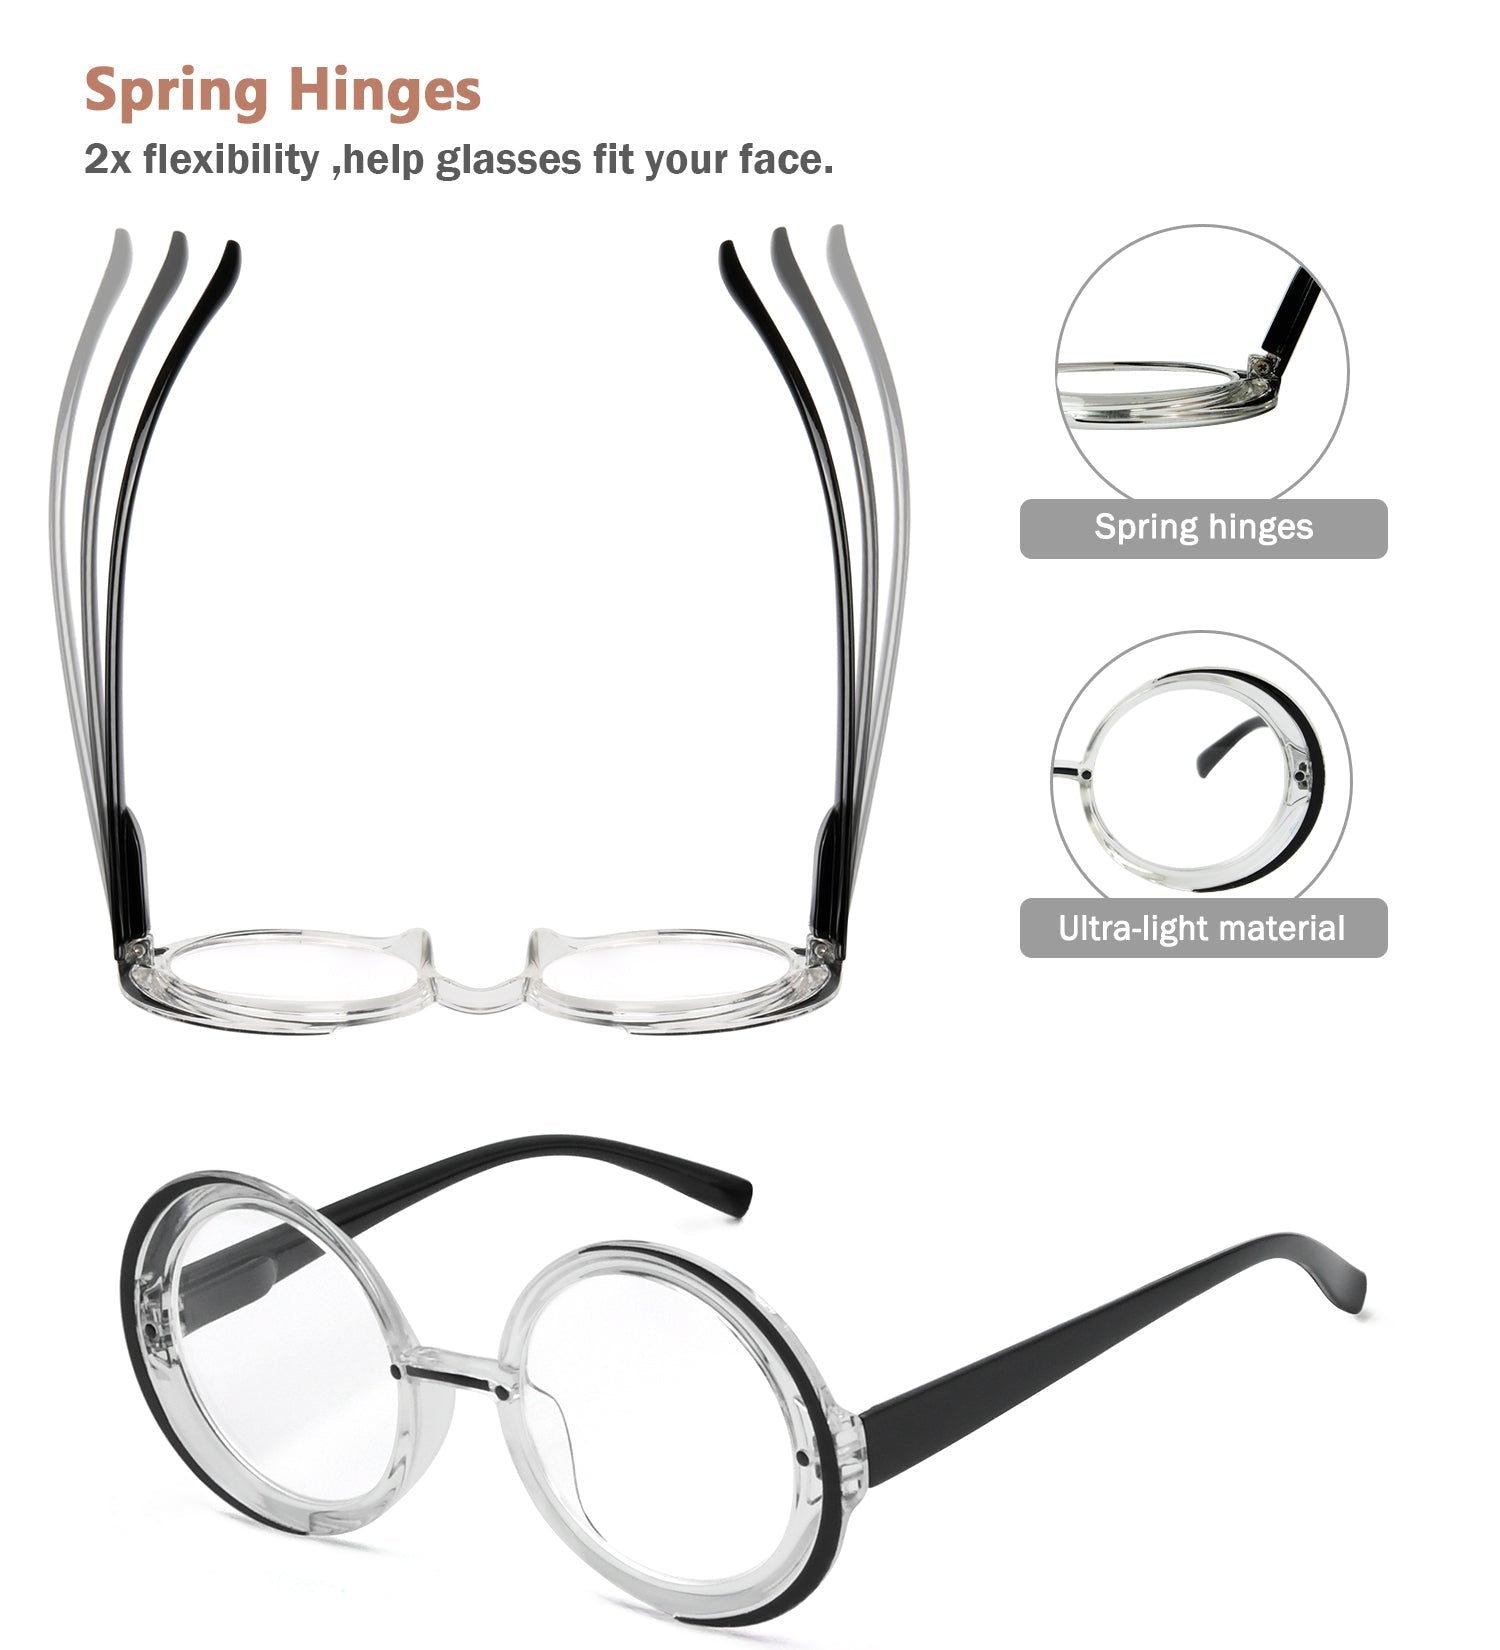 4 Pack Round Reading Glasses Stylish Readers Women R2005N